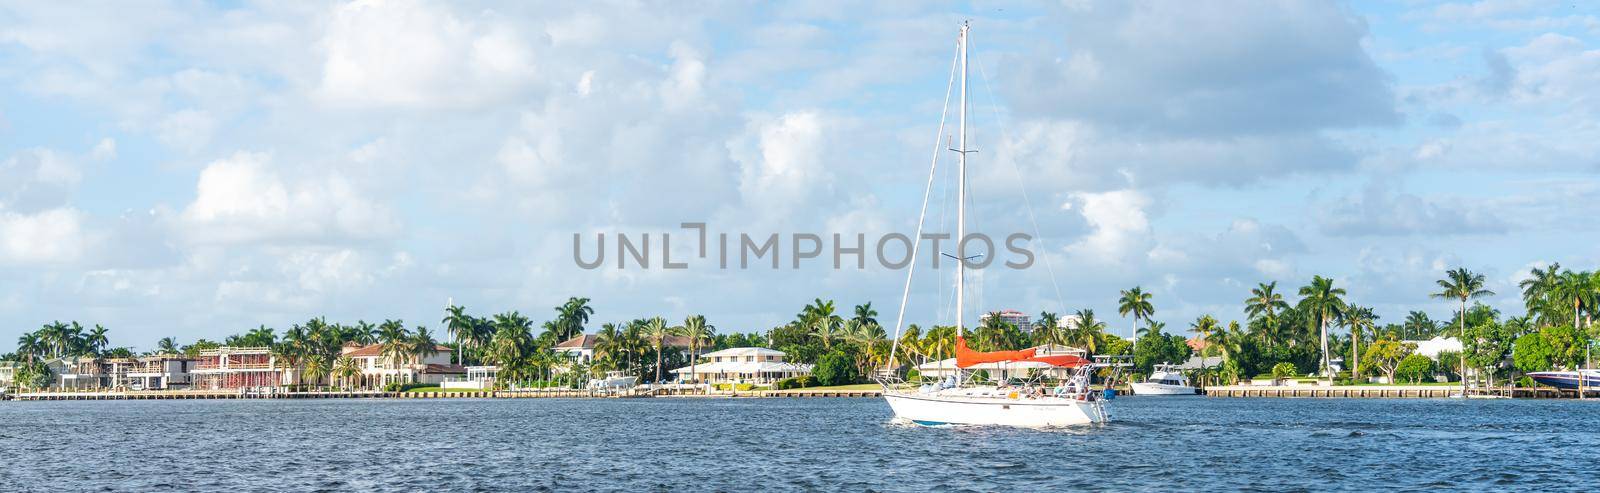 FORT LAUDERDALE, FLORIDA - September 20, 2019: Panorama of mansions in Fort Lauderdale